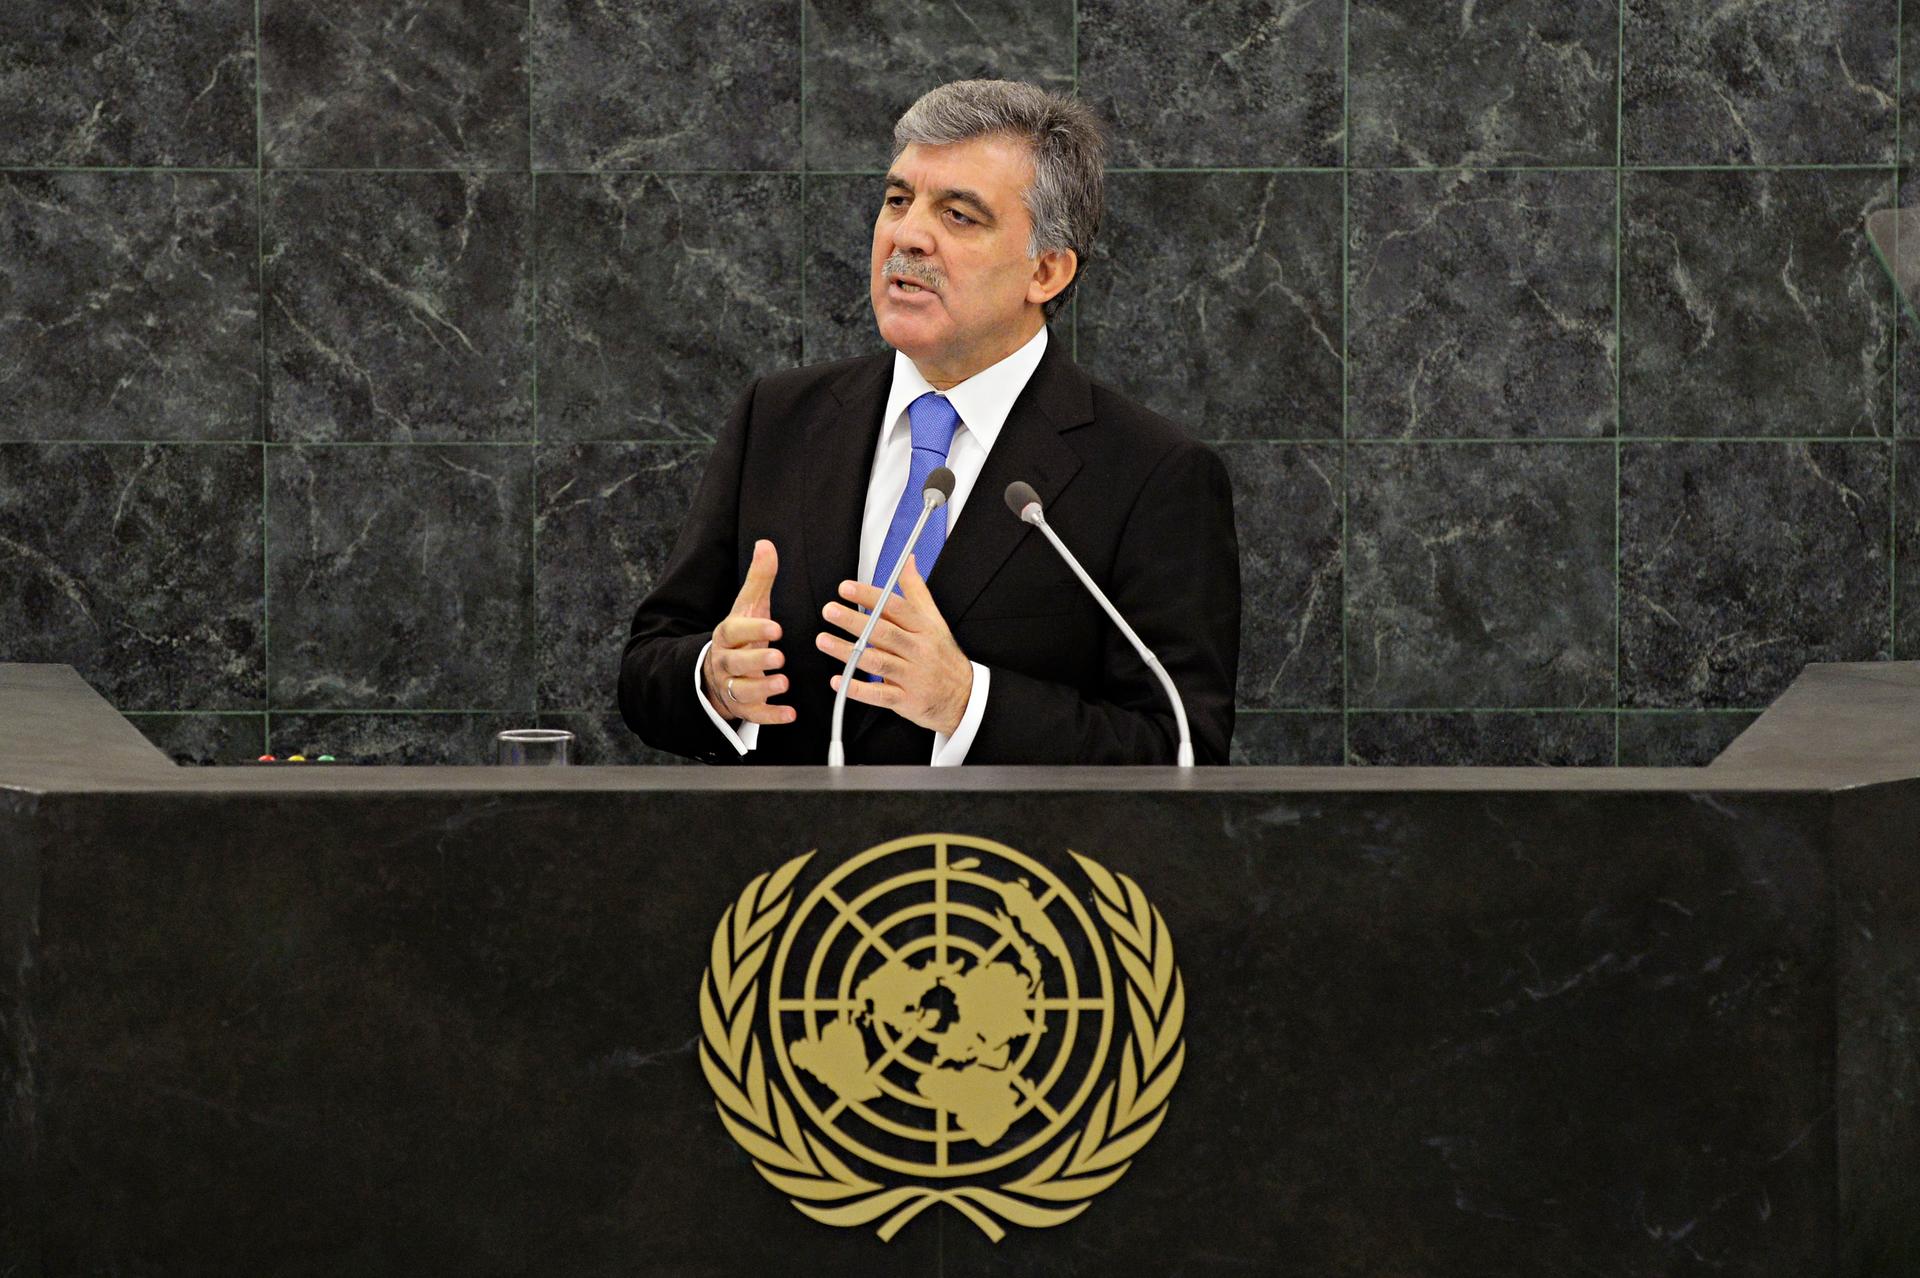 Turkish President Abdullah Gul addresses the 68th United Nations General Assembly in New York.